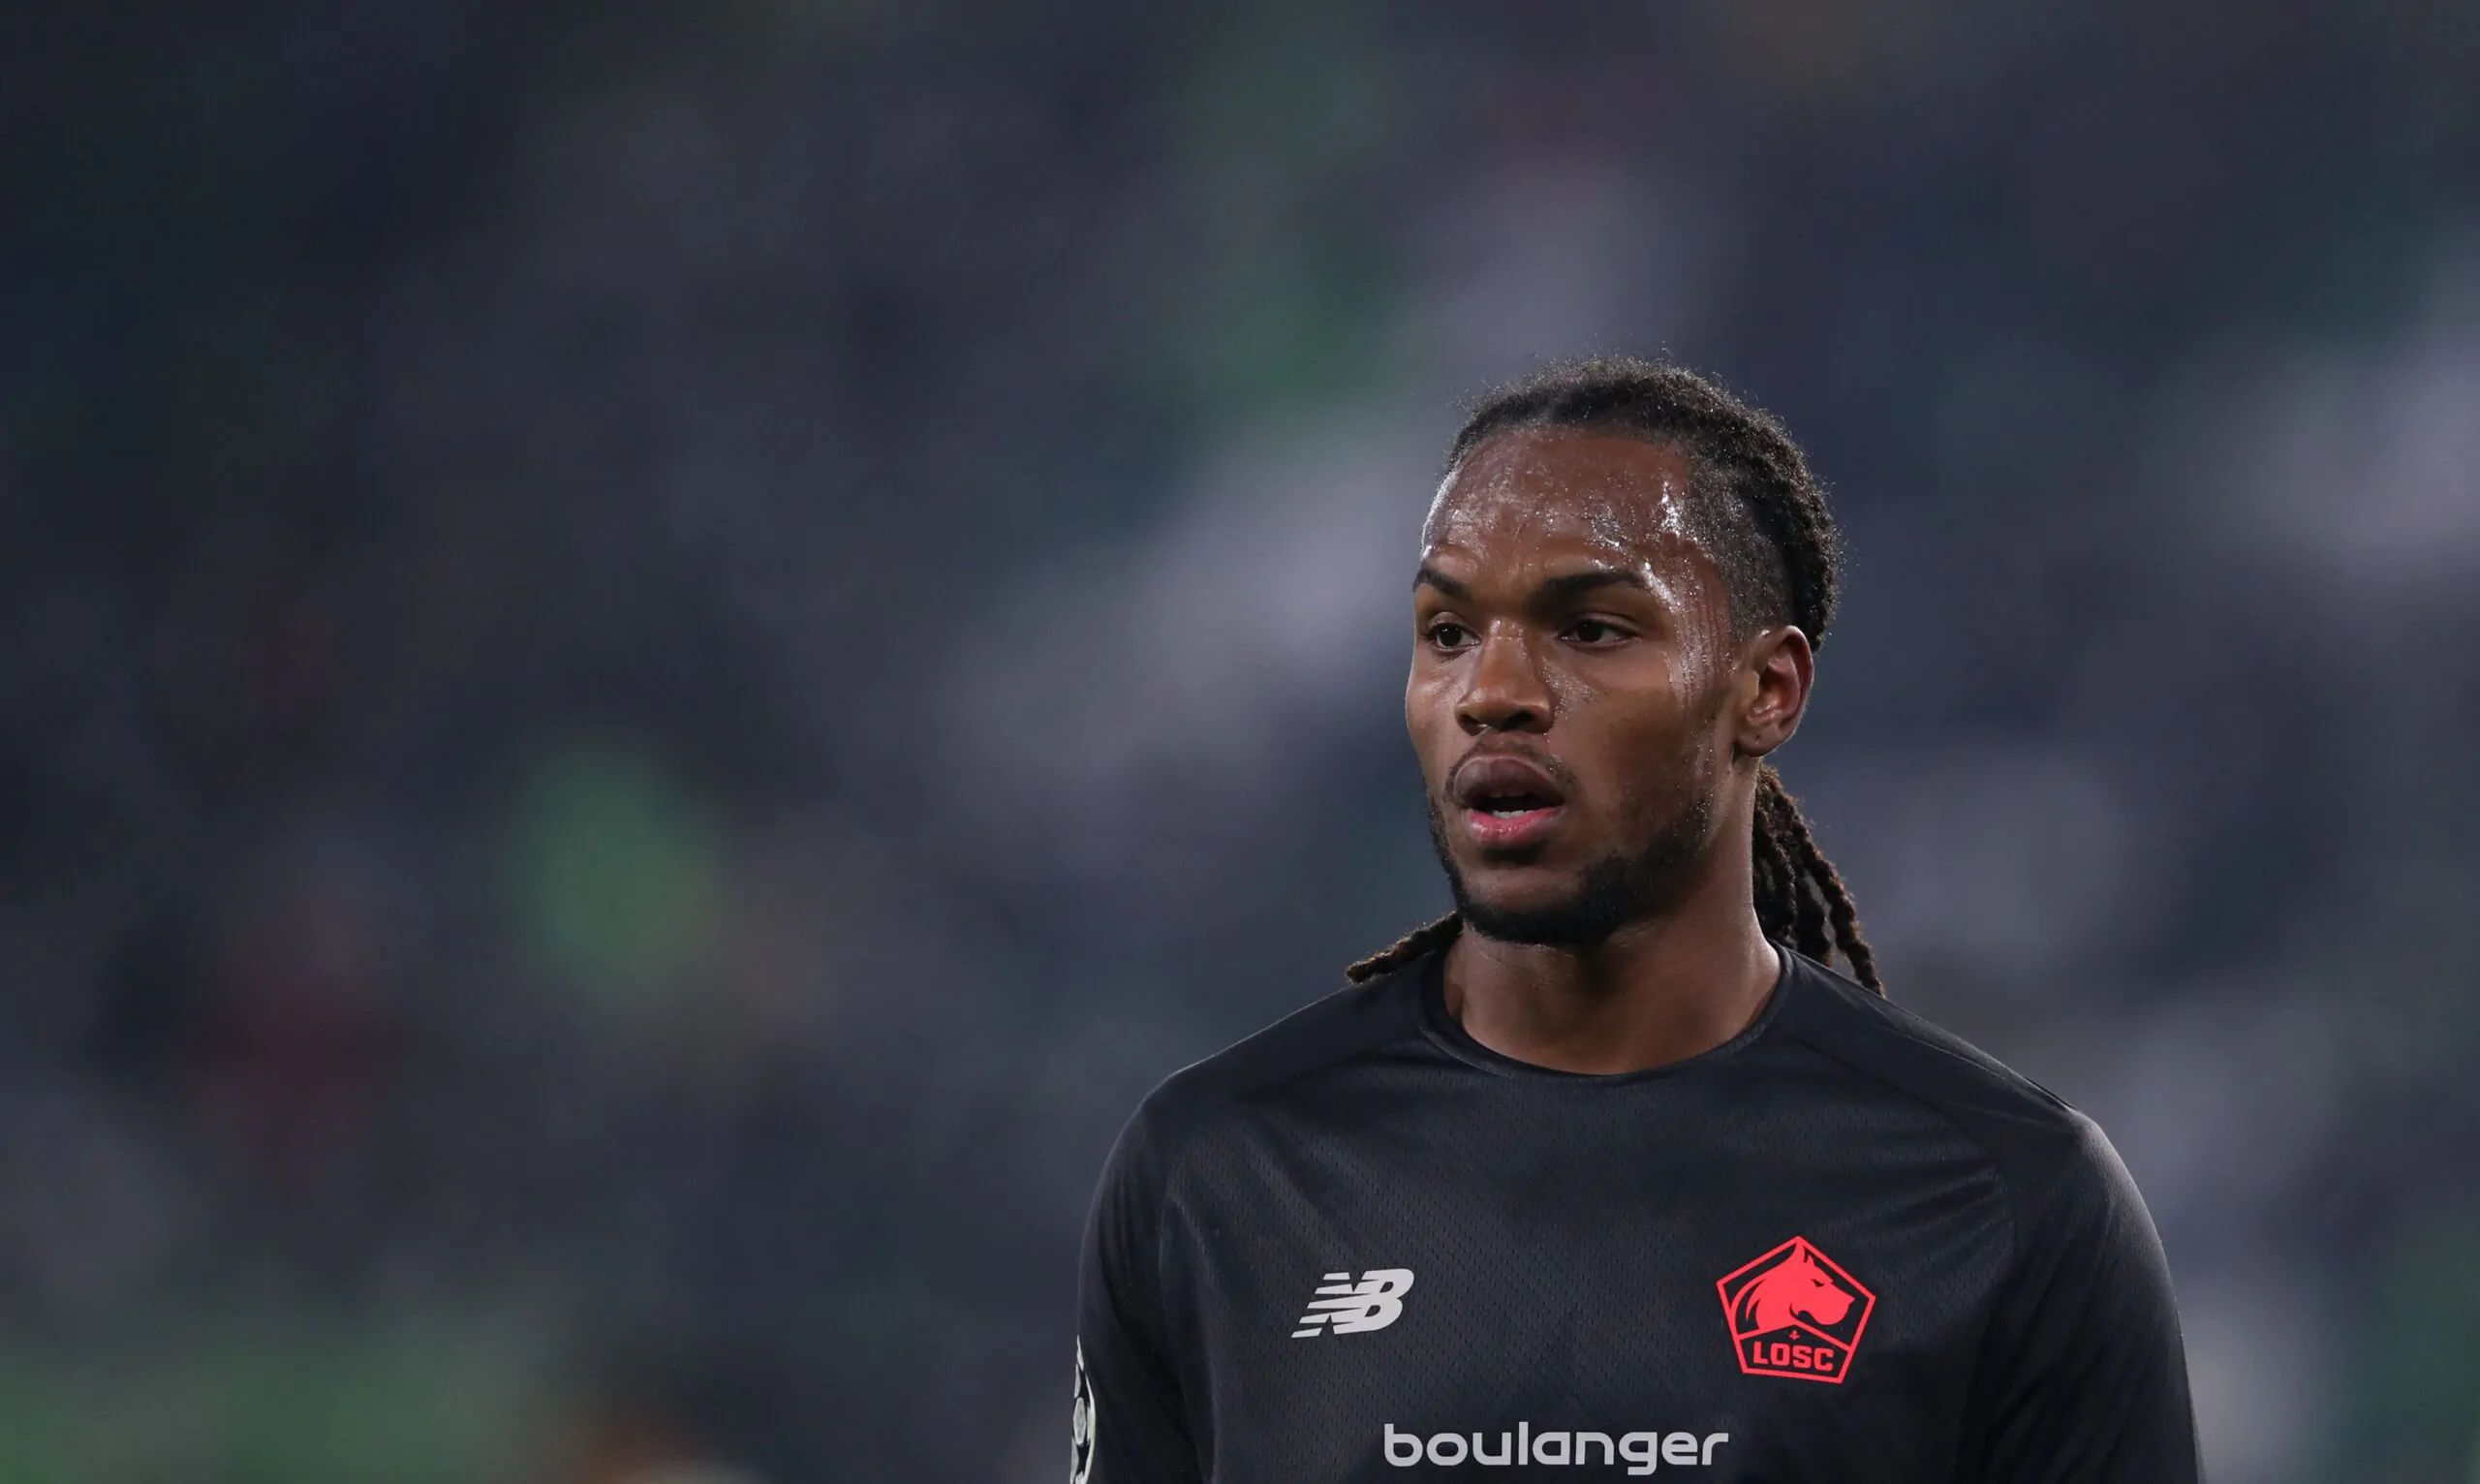 Milan have been after Renato Sanches and Sven Botman since last Autumn. One of the two chases is about to come to fruition, while the other might not.